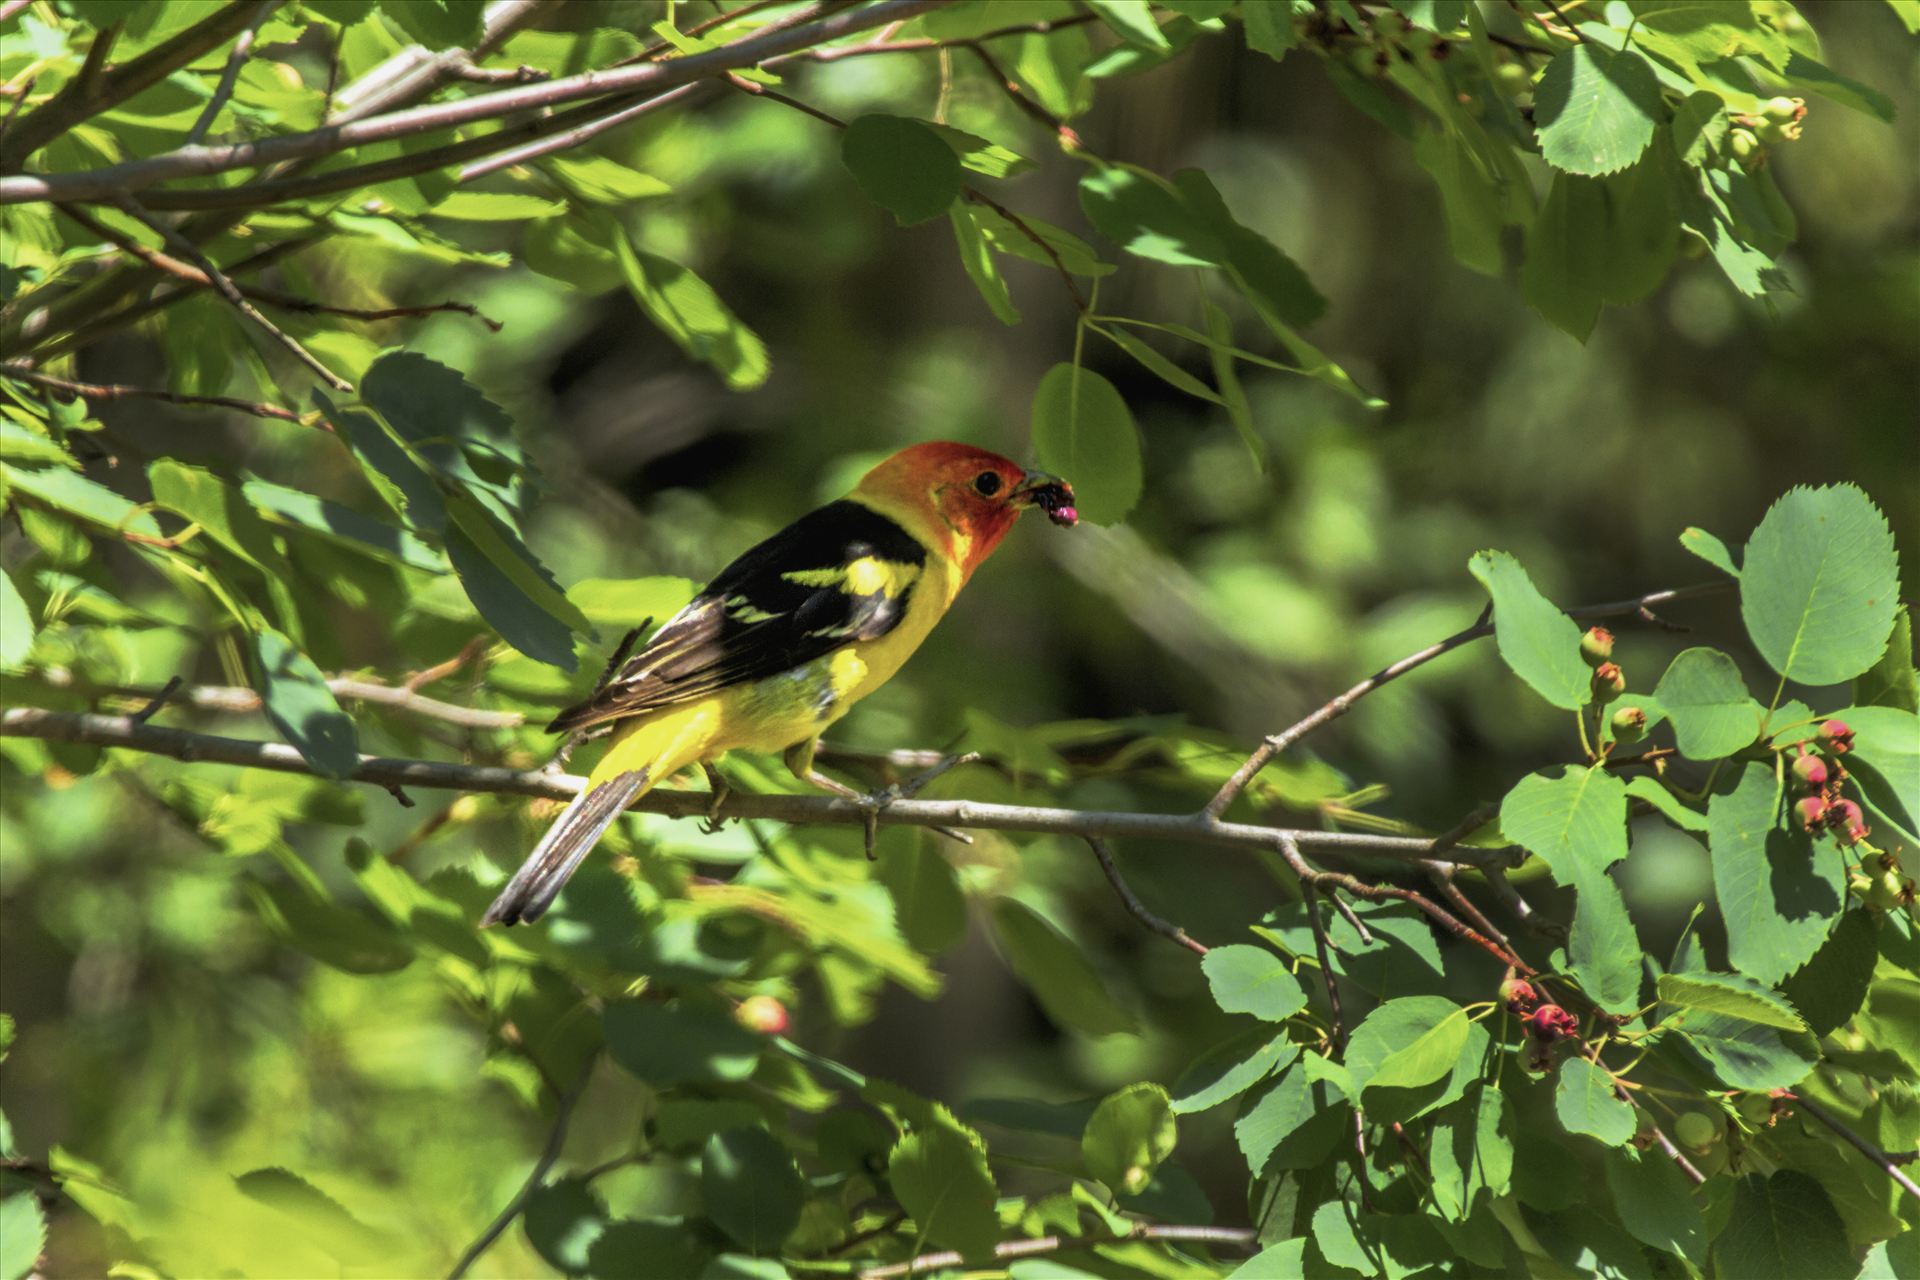 Western Tanager with Dinner - A Western Tanager with its beak full of berries. by Bear Conceptions Photography